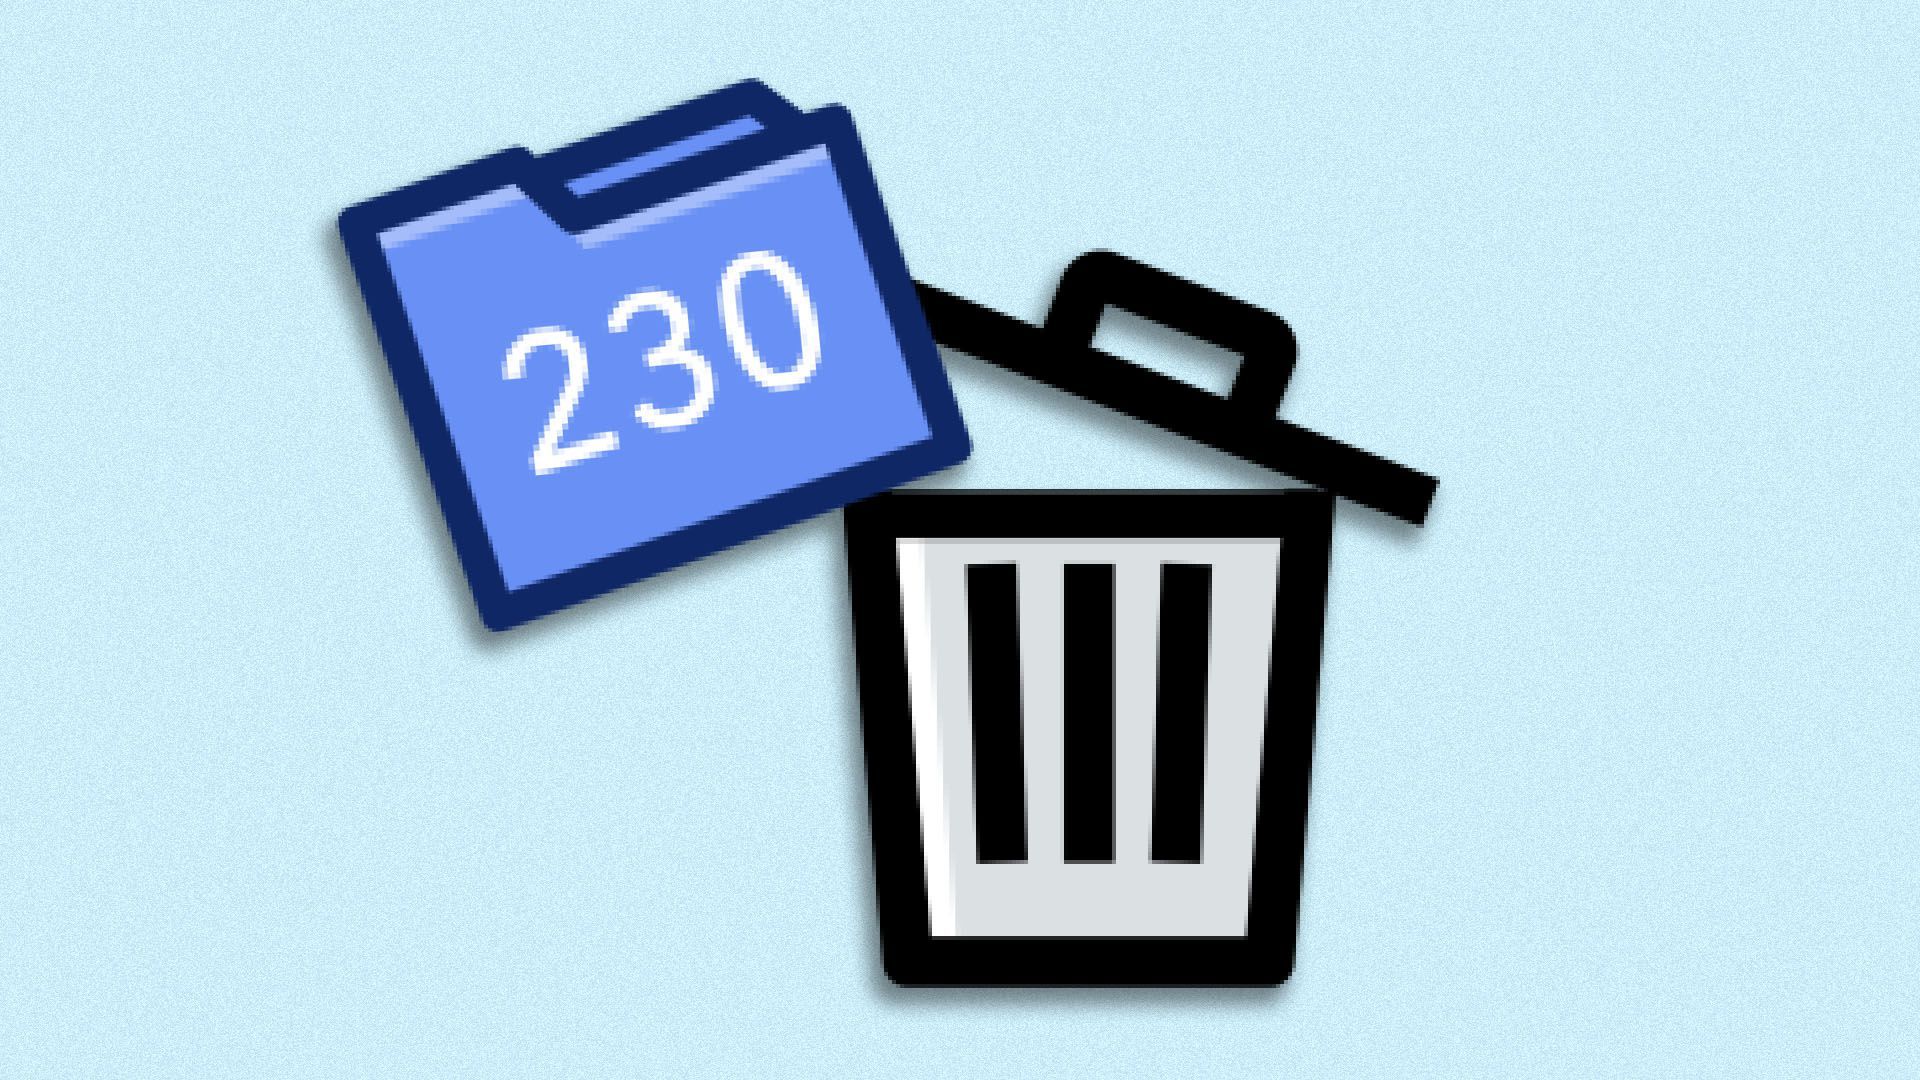 Illustration of a folder labeled 230 on the edge of a computer trash can 